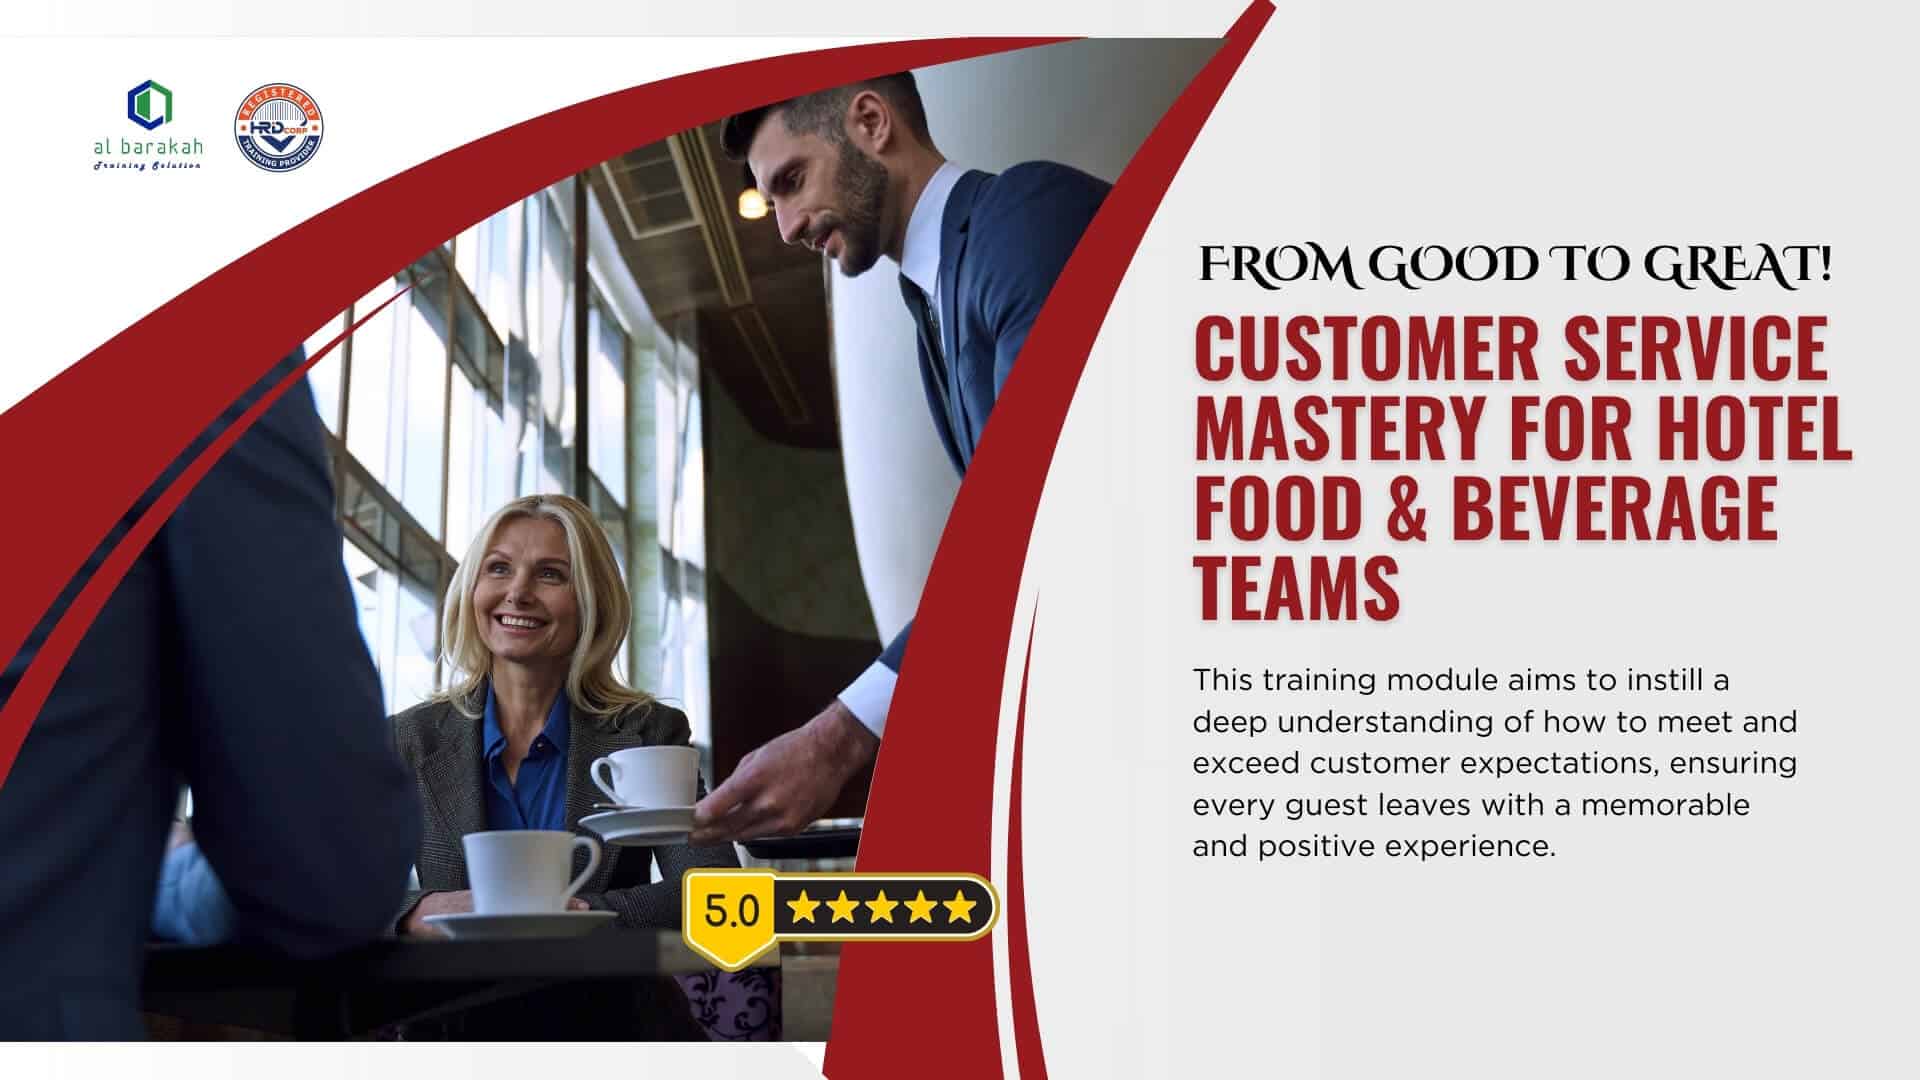 Customer Service Training Mastery for Hotel Food & Beverage Teams